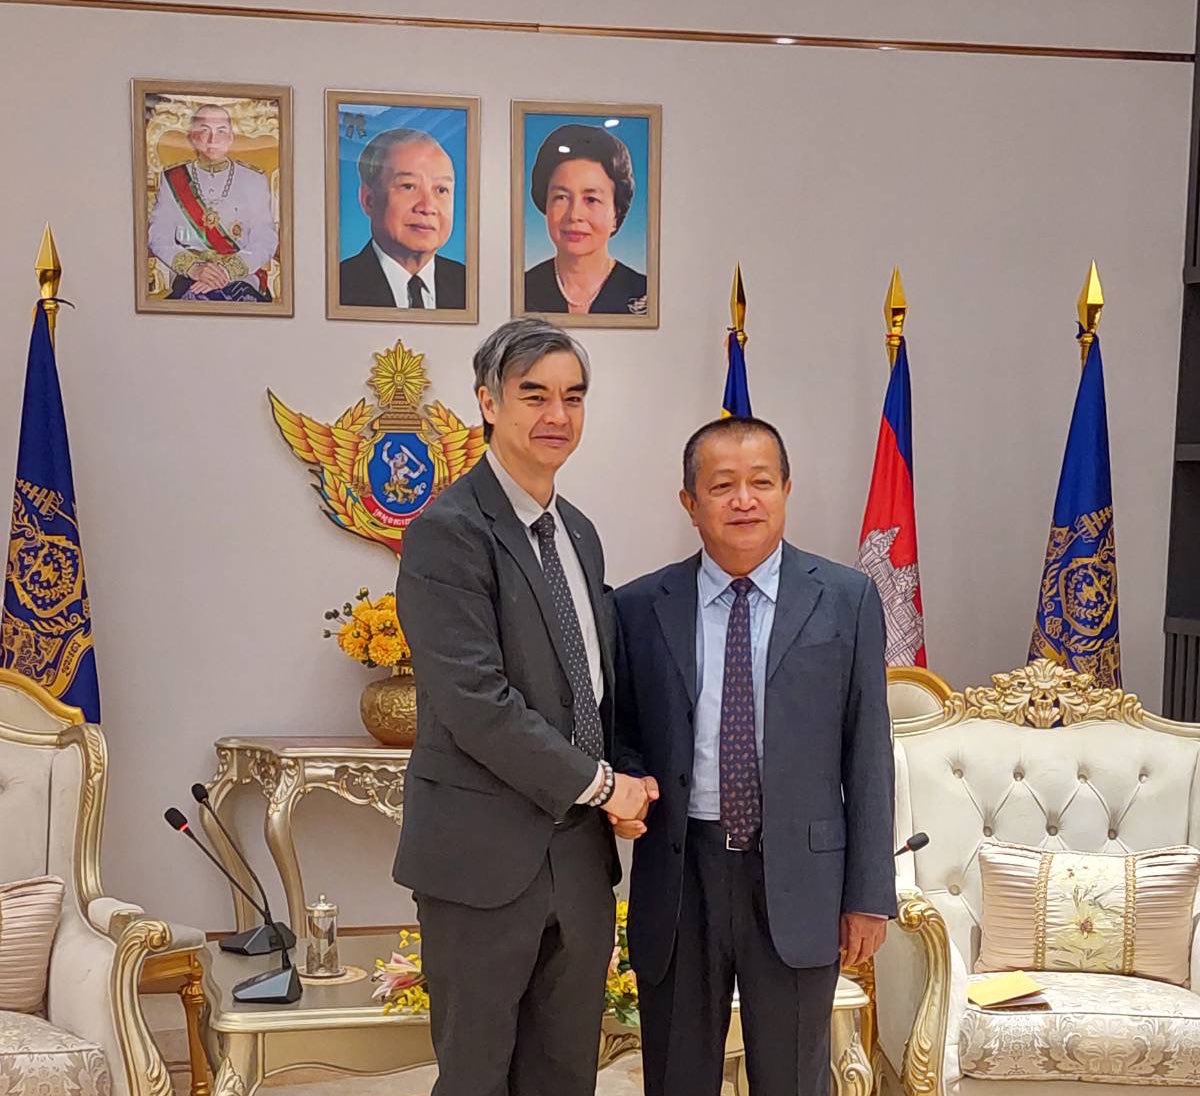 🇪🇺 and @ASEAN are strategic partners, cooperating across the board benefiting 🇰🇭 & the entire region. During a 2-day visit, 🇪🇺 Amb to ASEAN @sujiseam discussed with 🇰🇭 Ministers and officials joint work on the ASEAN Power Grid, green transition, demining, trade & more